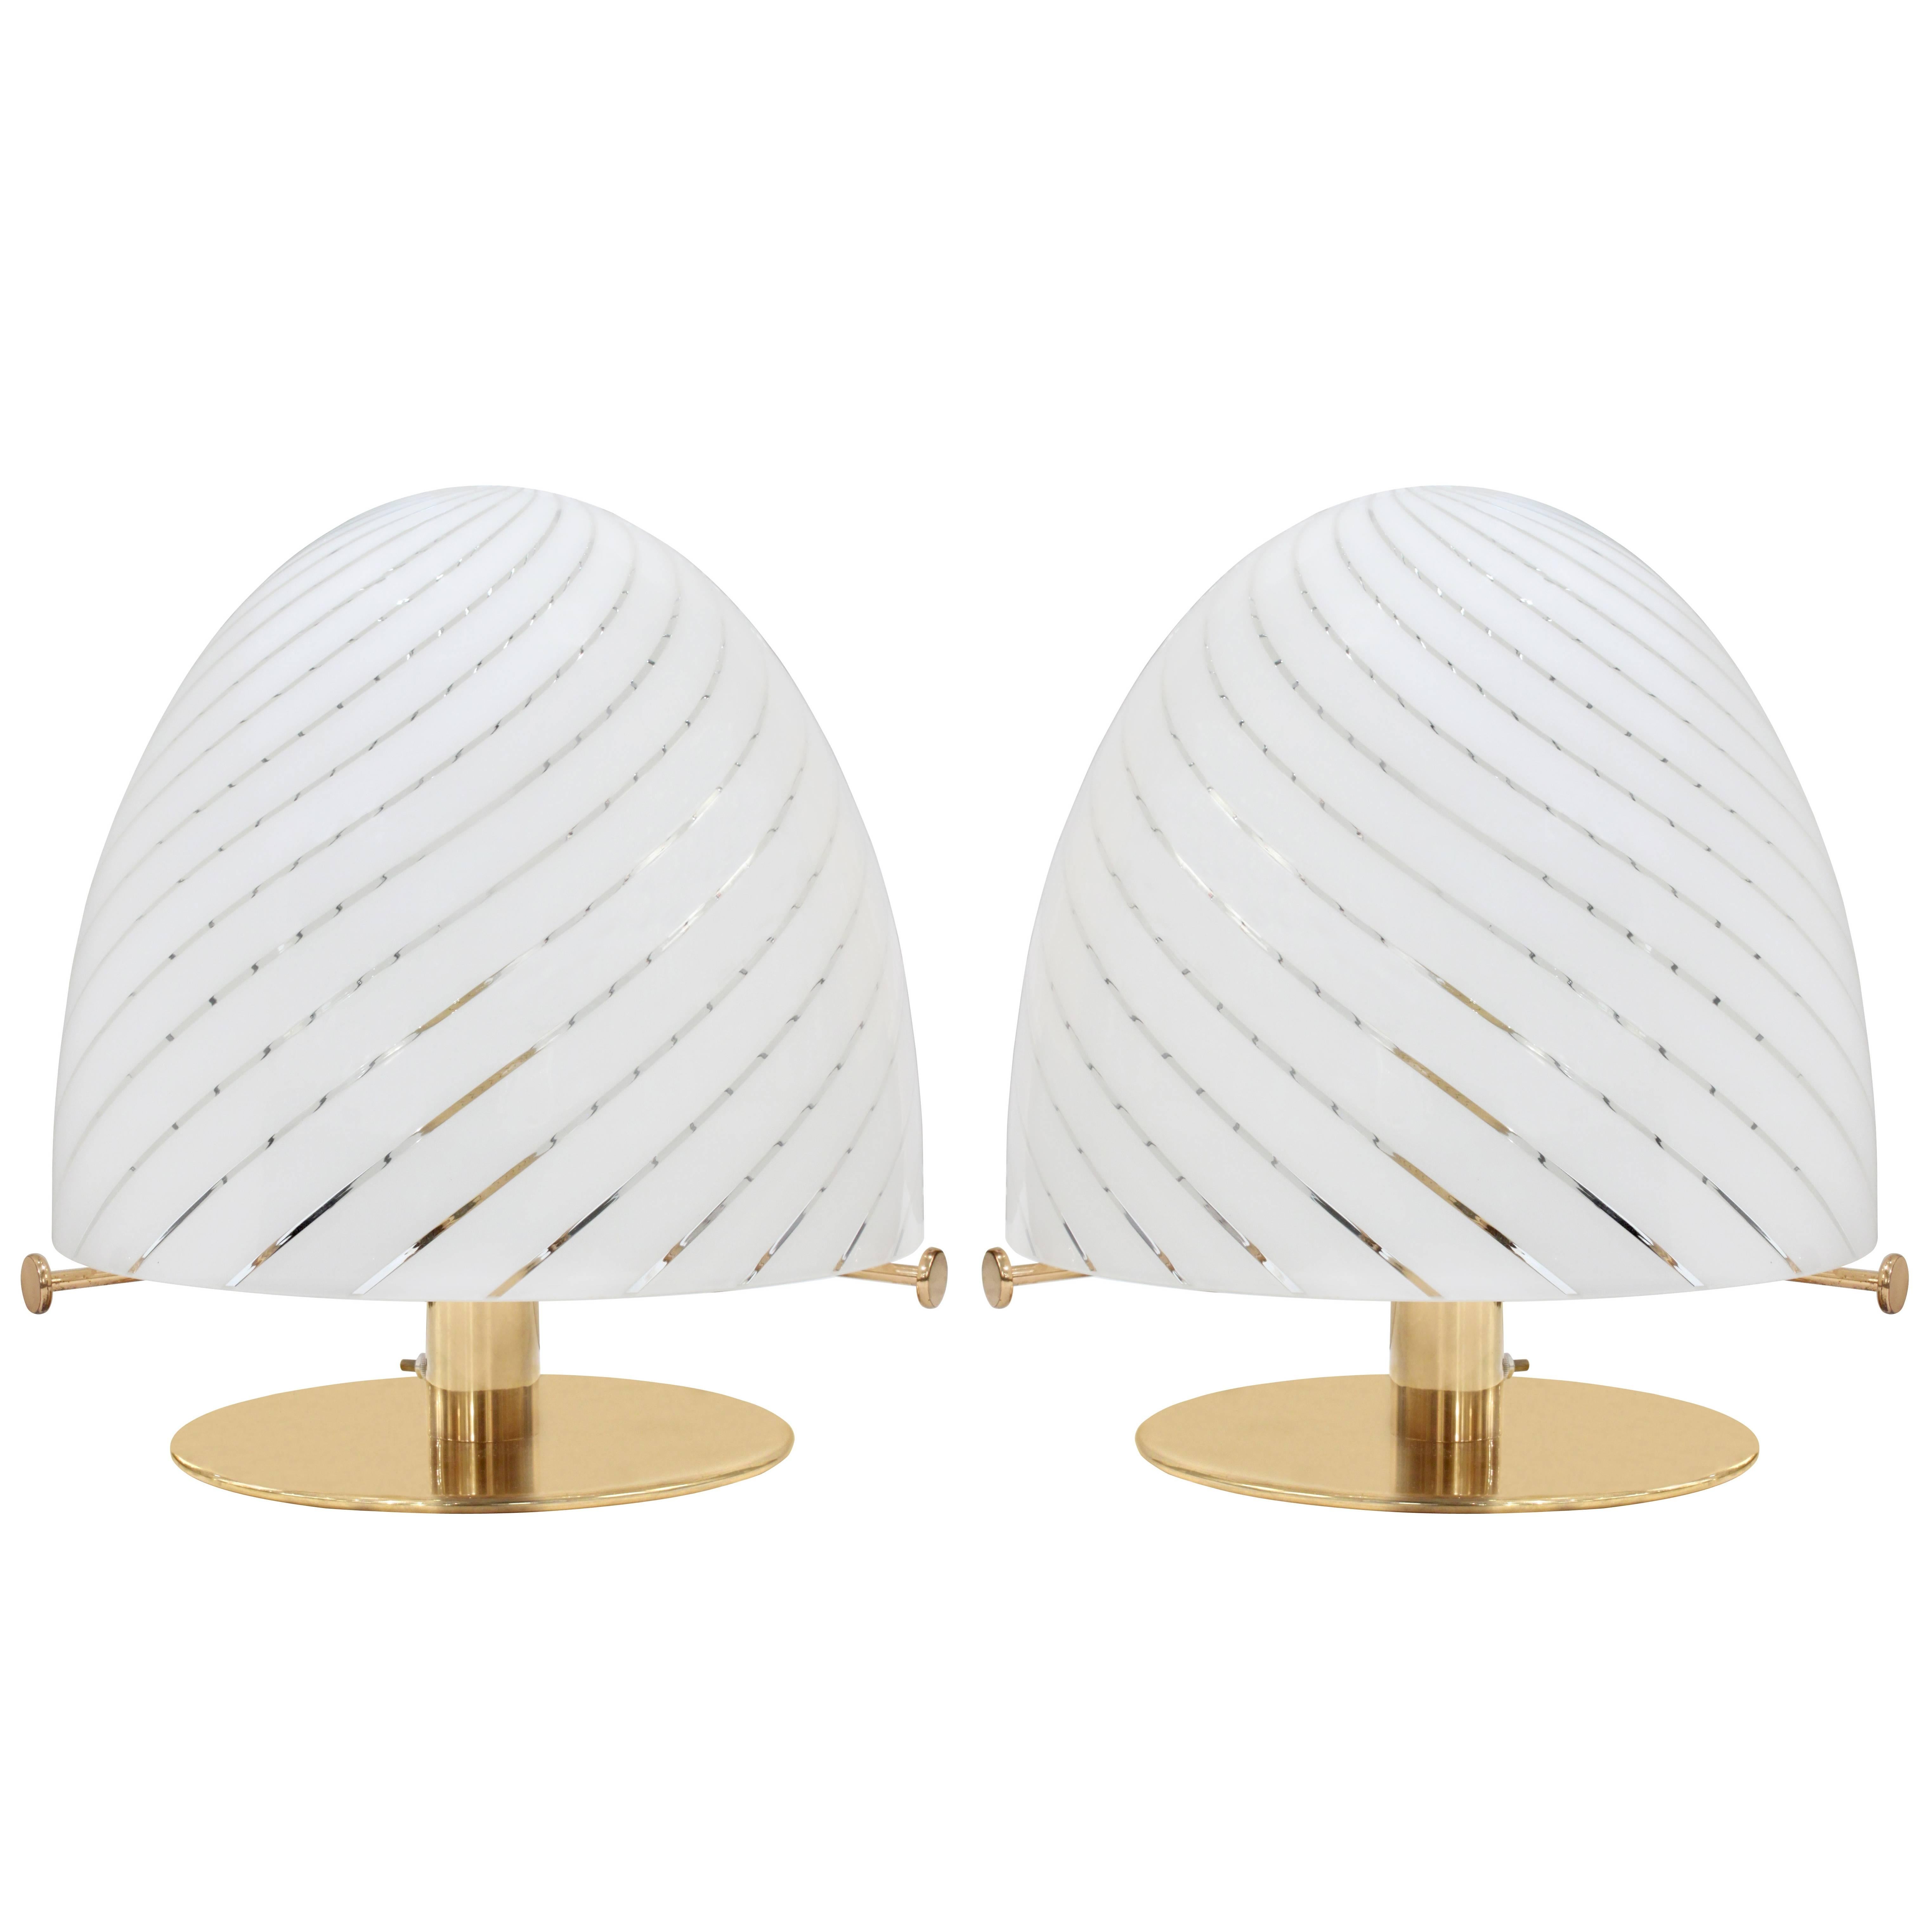 Pair of Sculptural Brass Table Lamps with Dome-Shape Glass Shades